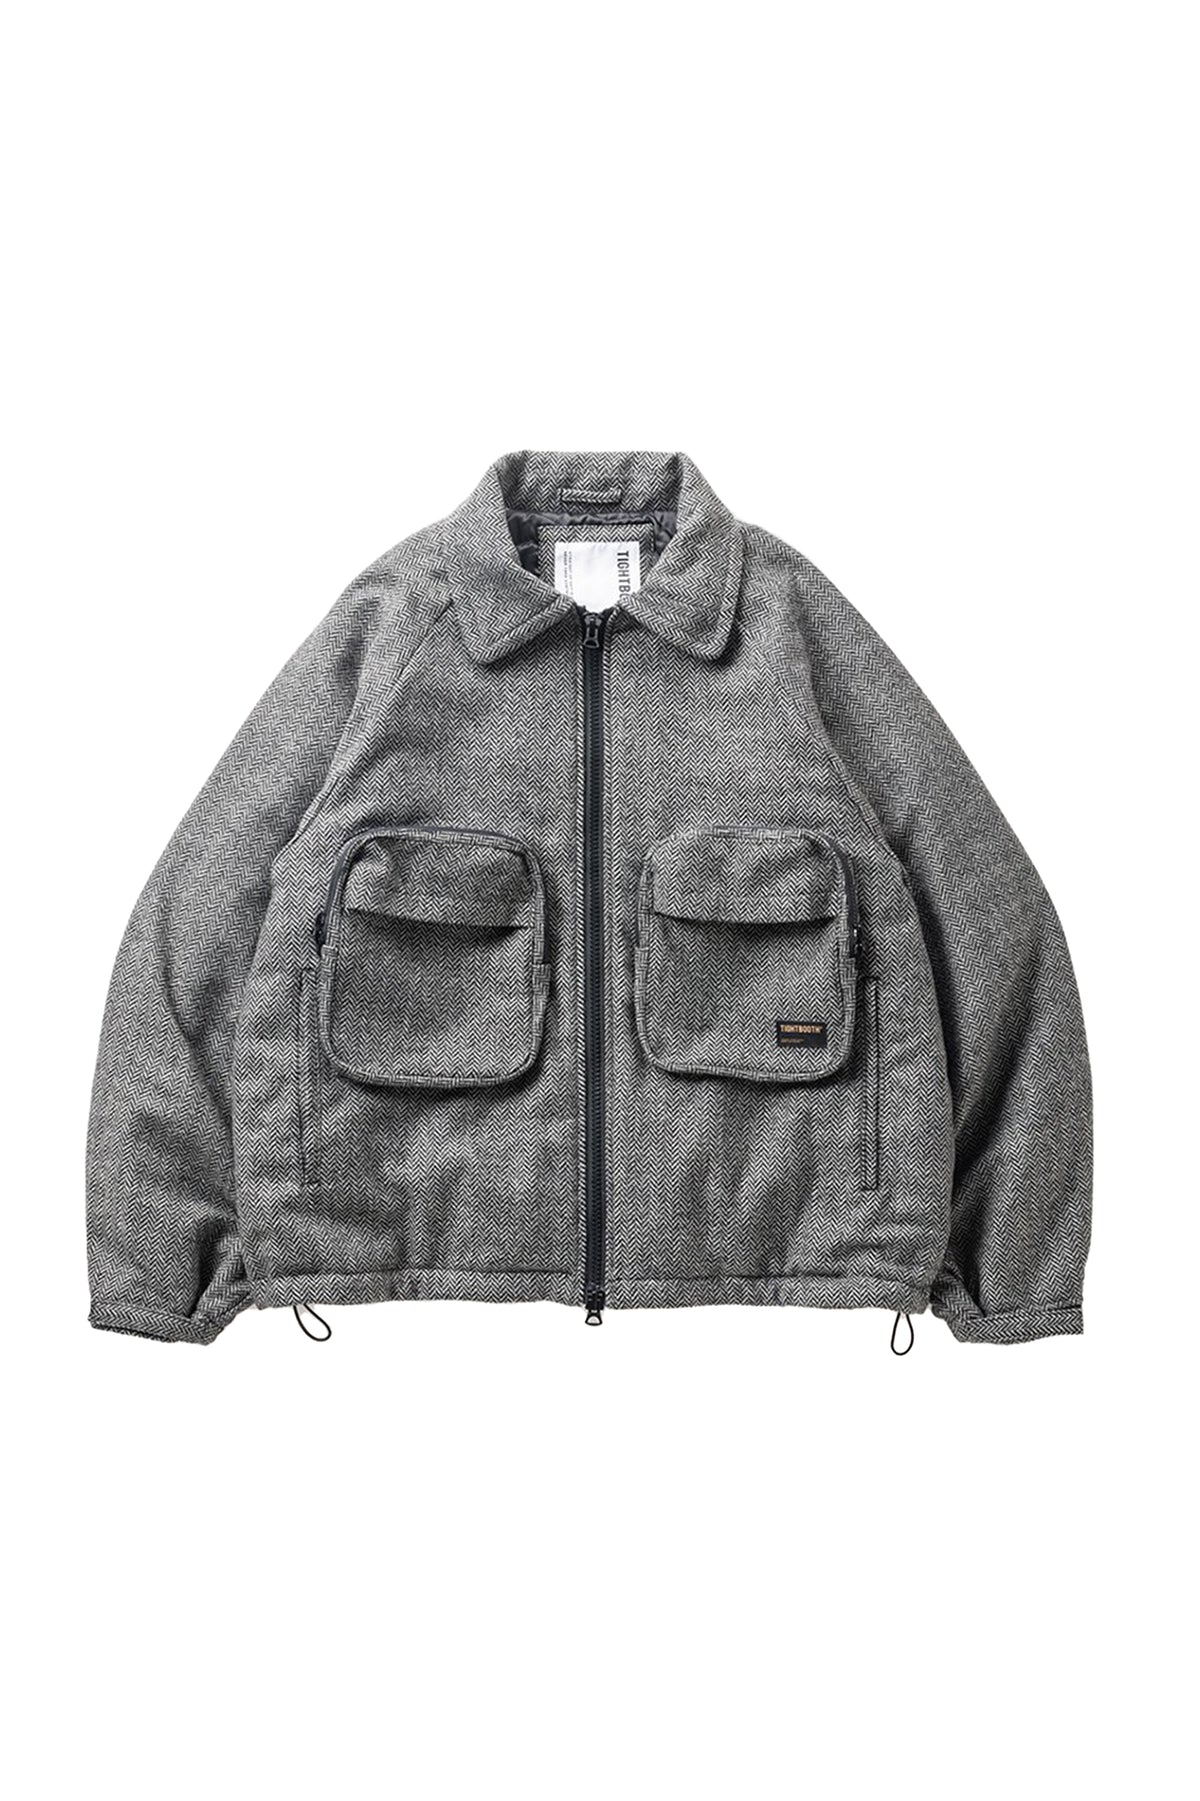 TIGHTBOOTH TWEED PUFFY JKT / GRY